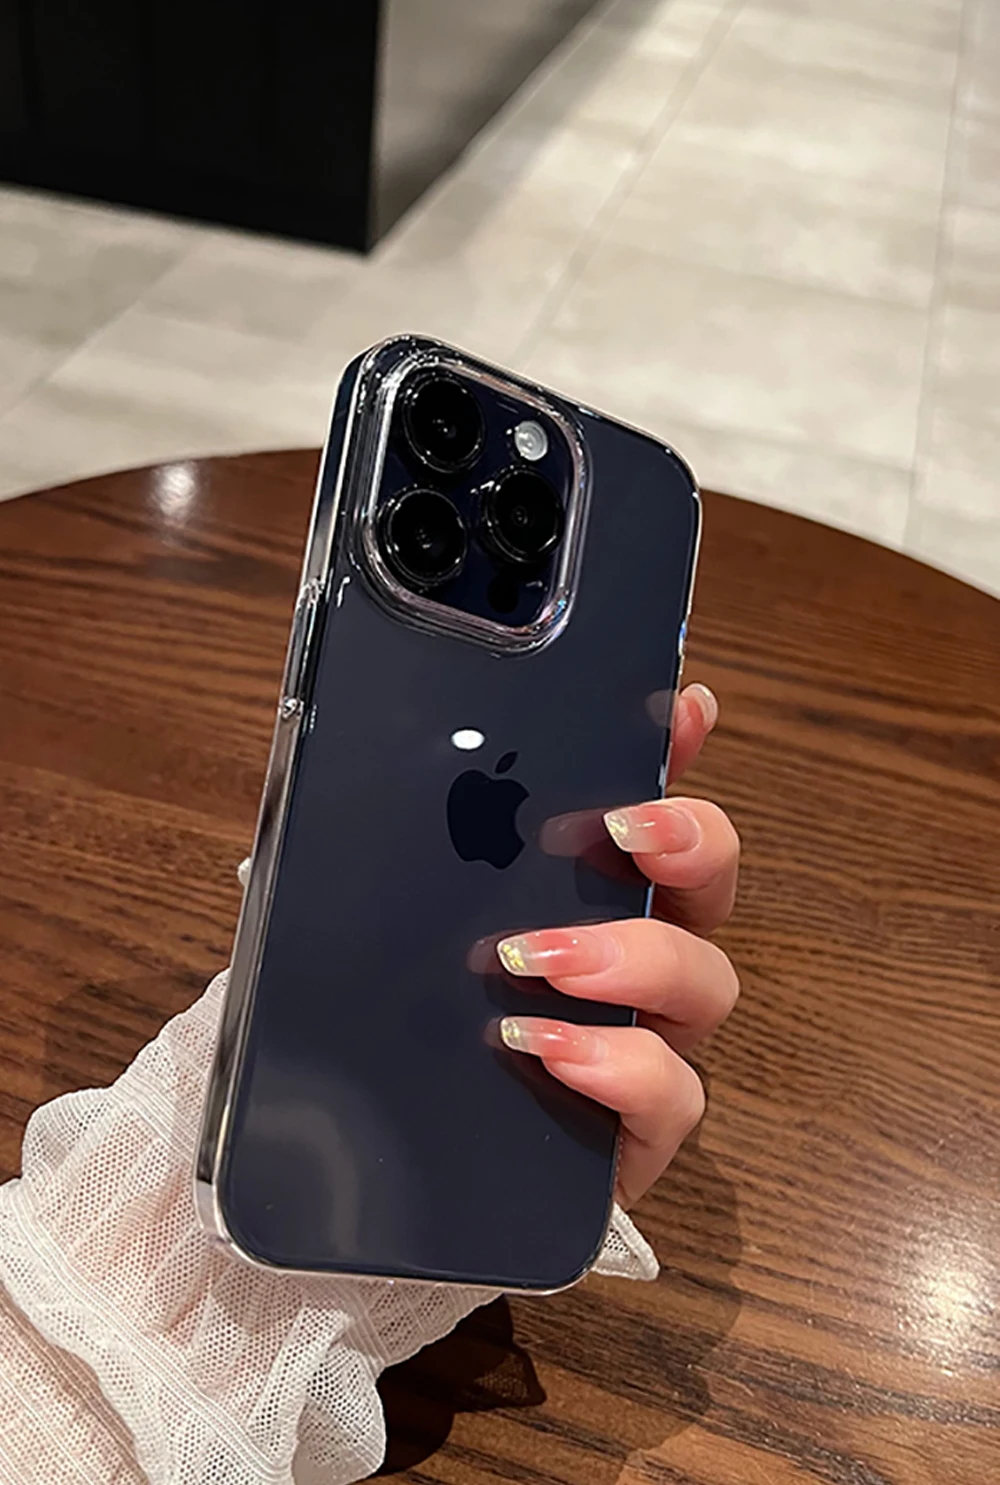 iPhone 15 back case, iPhone 15 back cover ,iPhone 15 plus back case, iPhone 15 Plus back cover, iPhone 15 Pro back case, iPhone 15 Pro back Cover, iphone 11 back cover, iphone 11 pro back cover, iphone back cover, iphone 11 back cover, iphone 15 cover iphone 15 pro max case iphone 15 case iphone 15 pro case iphone 15 pro max cover iphone 15 phone case iphone 15 plus case iphone 15 pro max phone case best iphone 15 pro case iphone 15 pro cover iphone 15 pro max back cover iphone 12 back cover